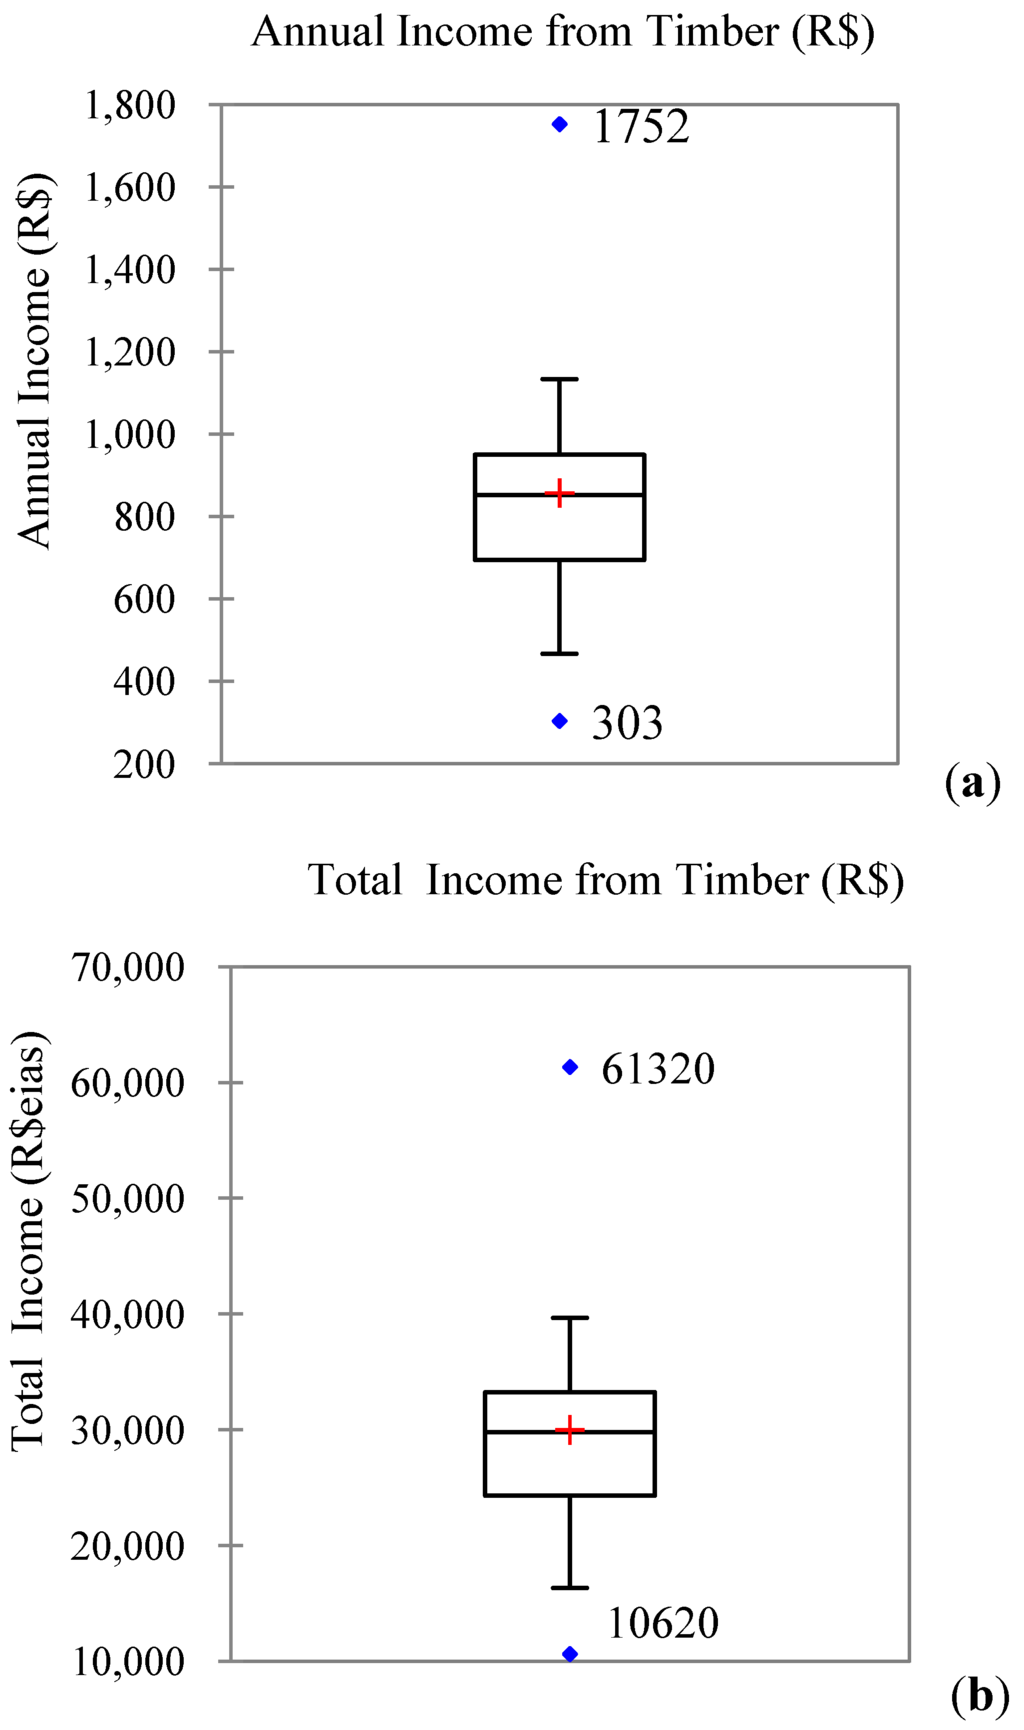 Forests | Free Full-Text | The Contribution of Multiple Use Forest  Management to Small Farmers' Annual Incomes in the Eastern Amazon | HTML